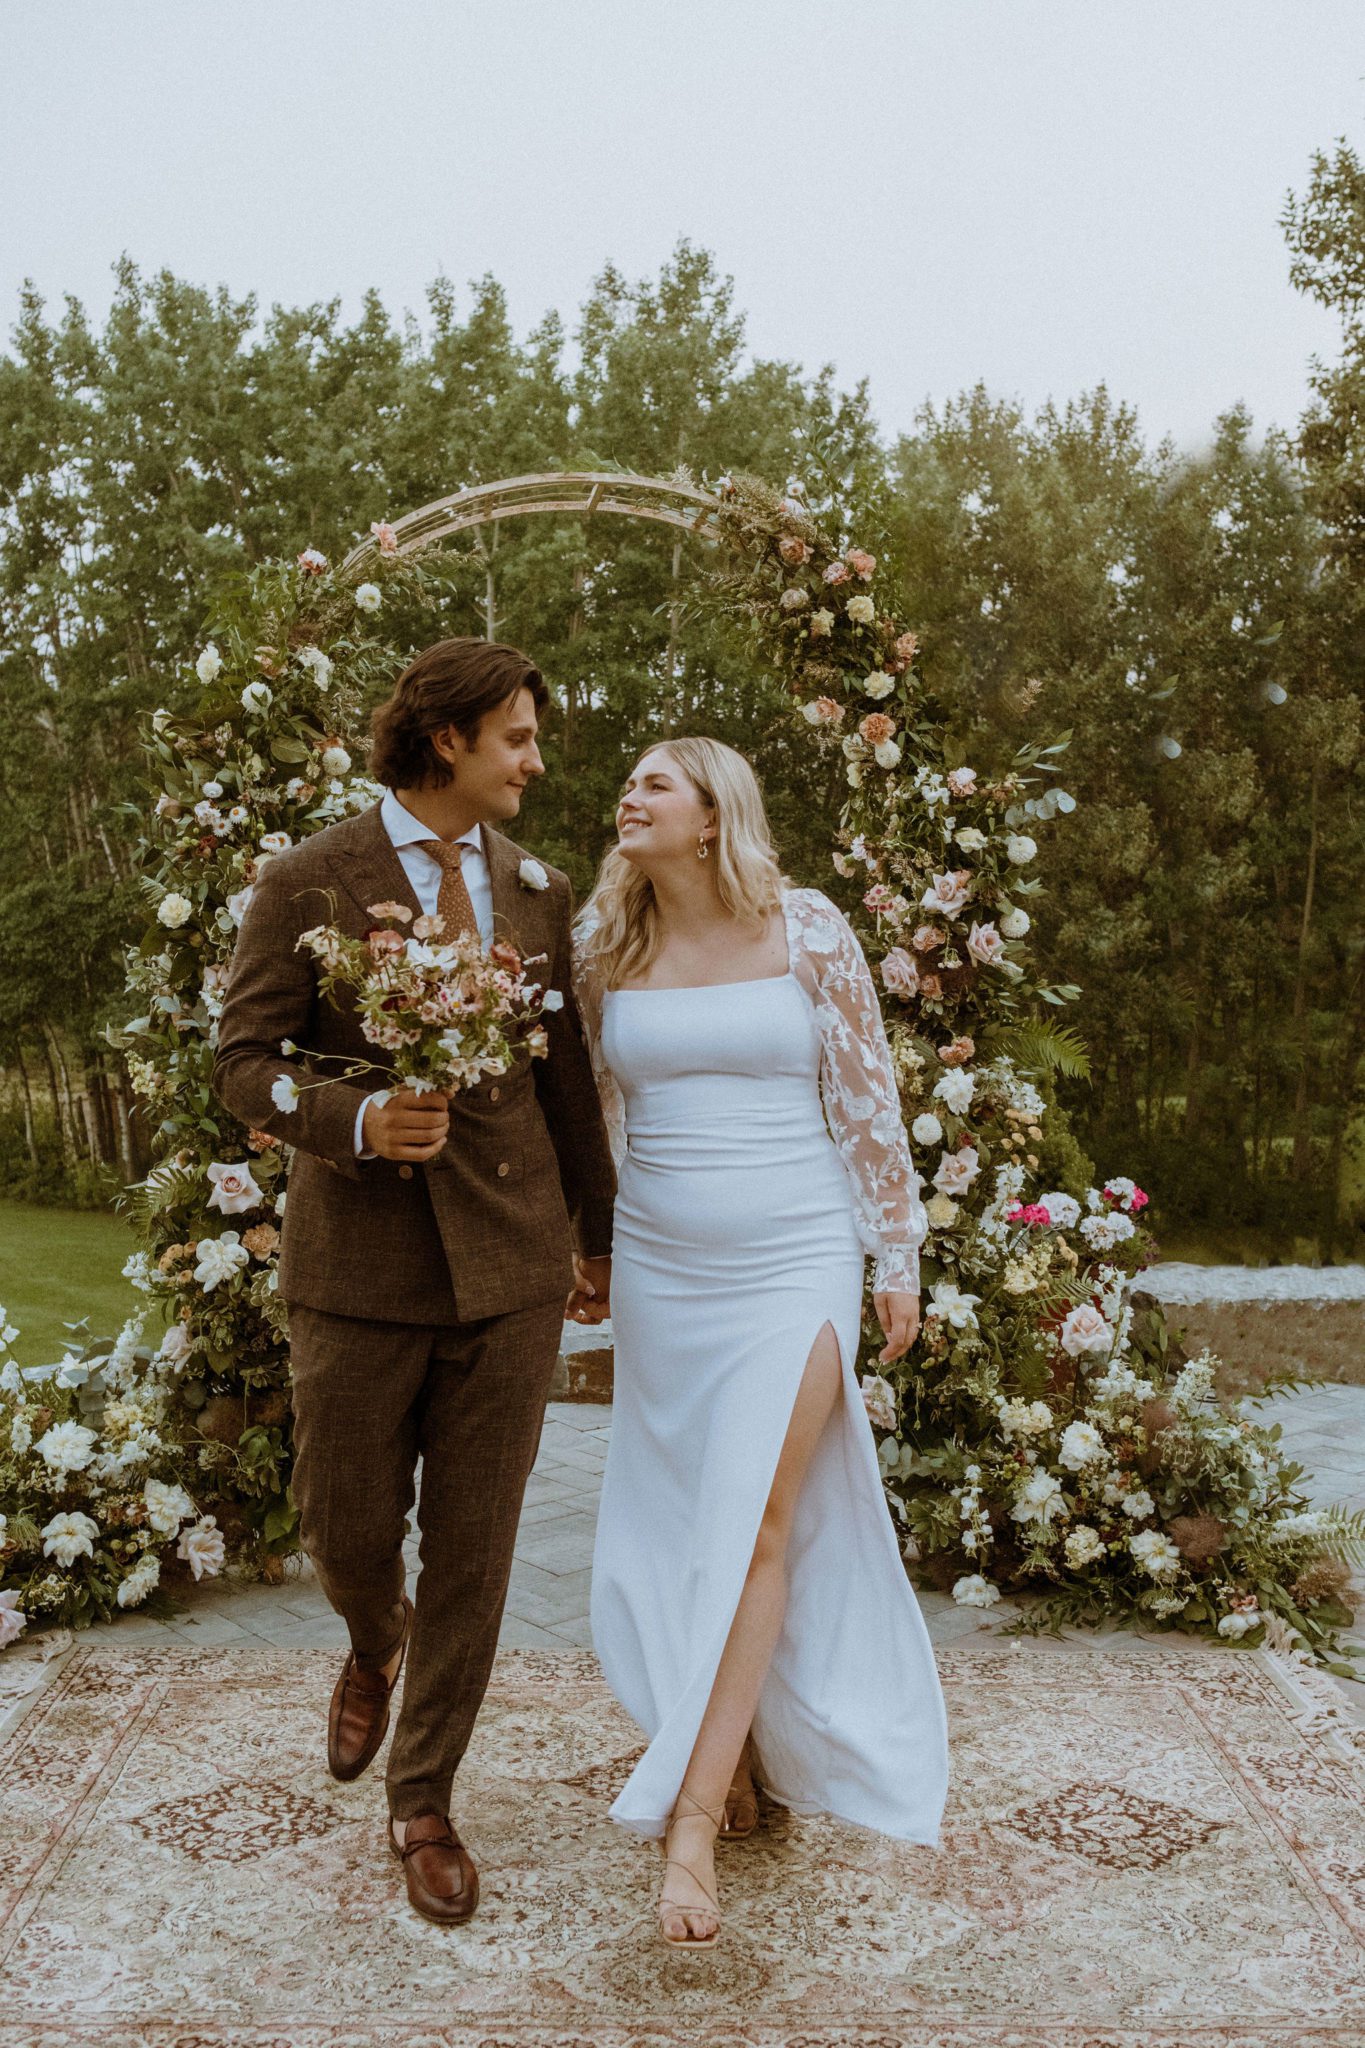 Bridal portraits in front of pink and green dramatic floral arch, dusty pink and green cottage core wedding inspiration, unique wedding attire